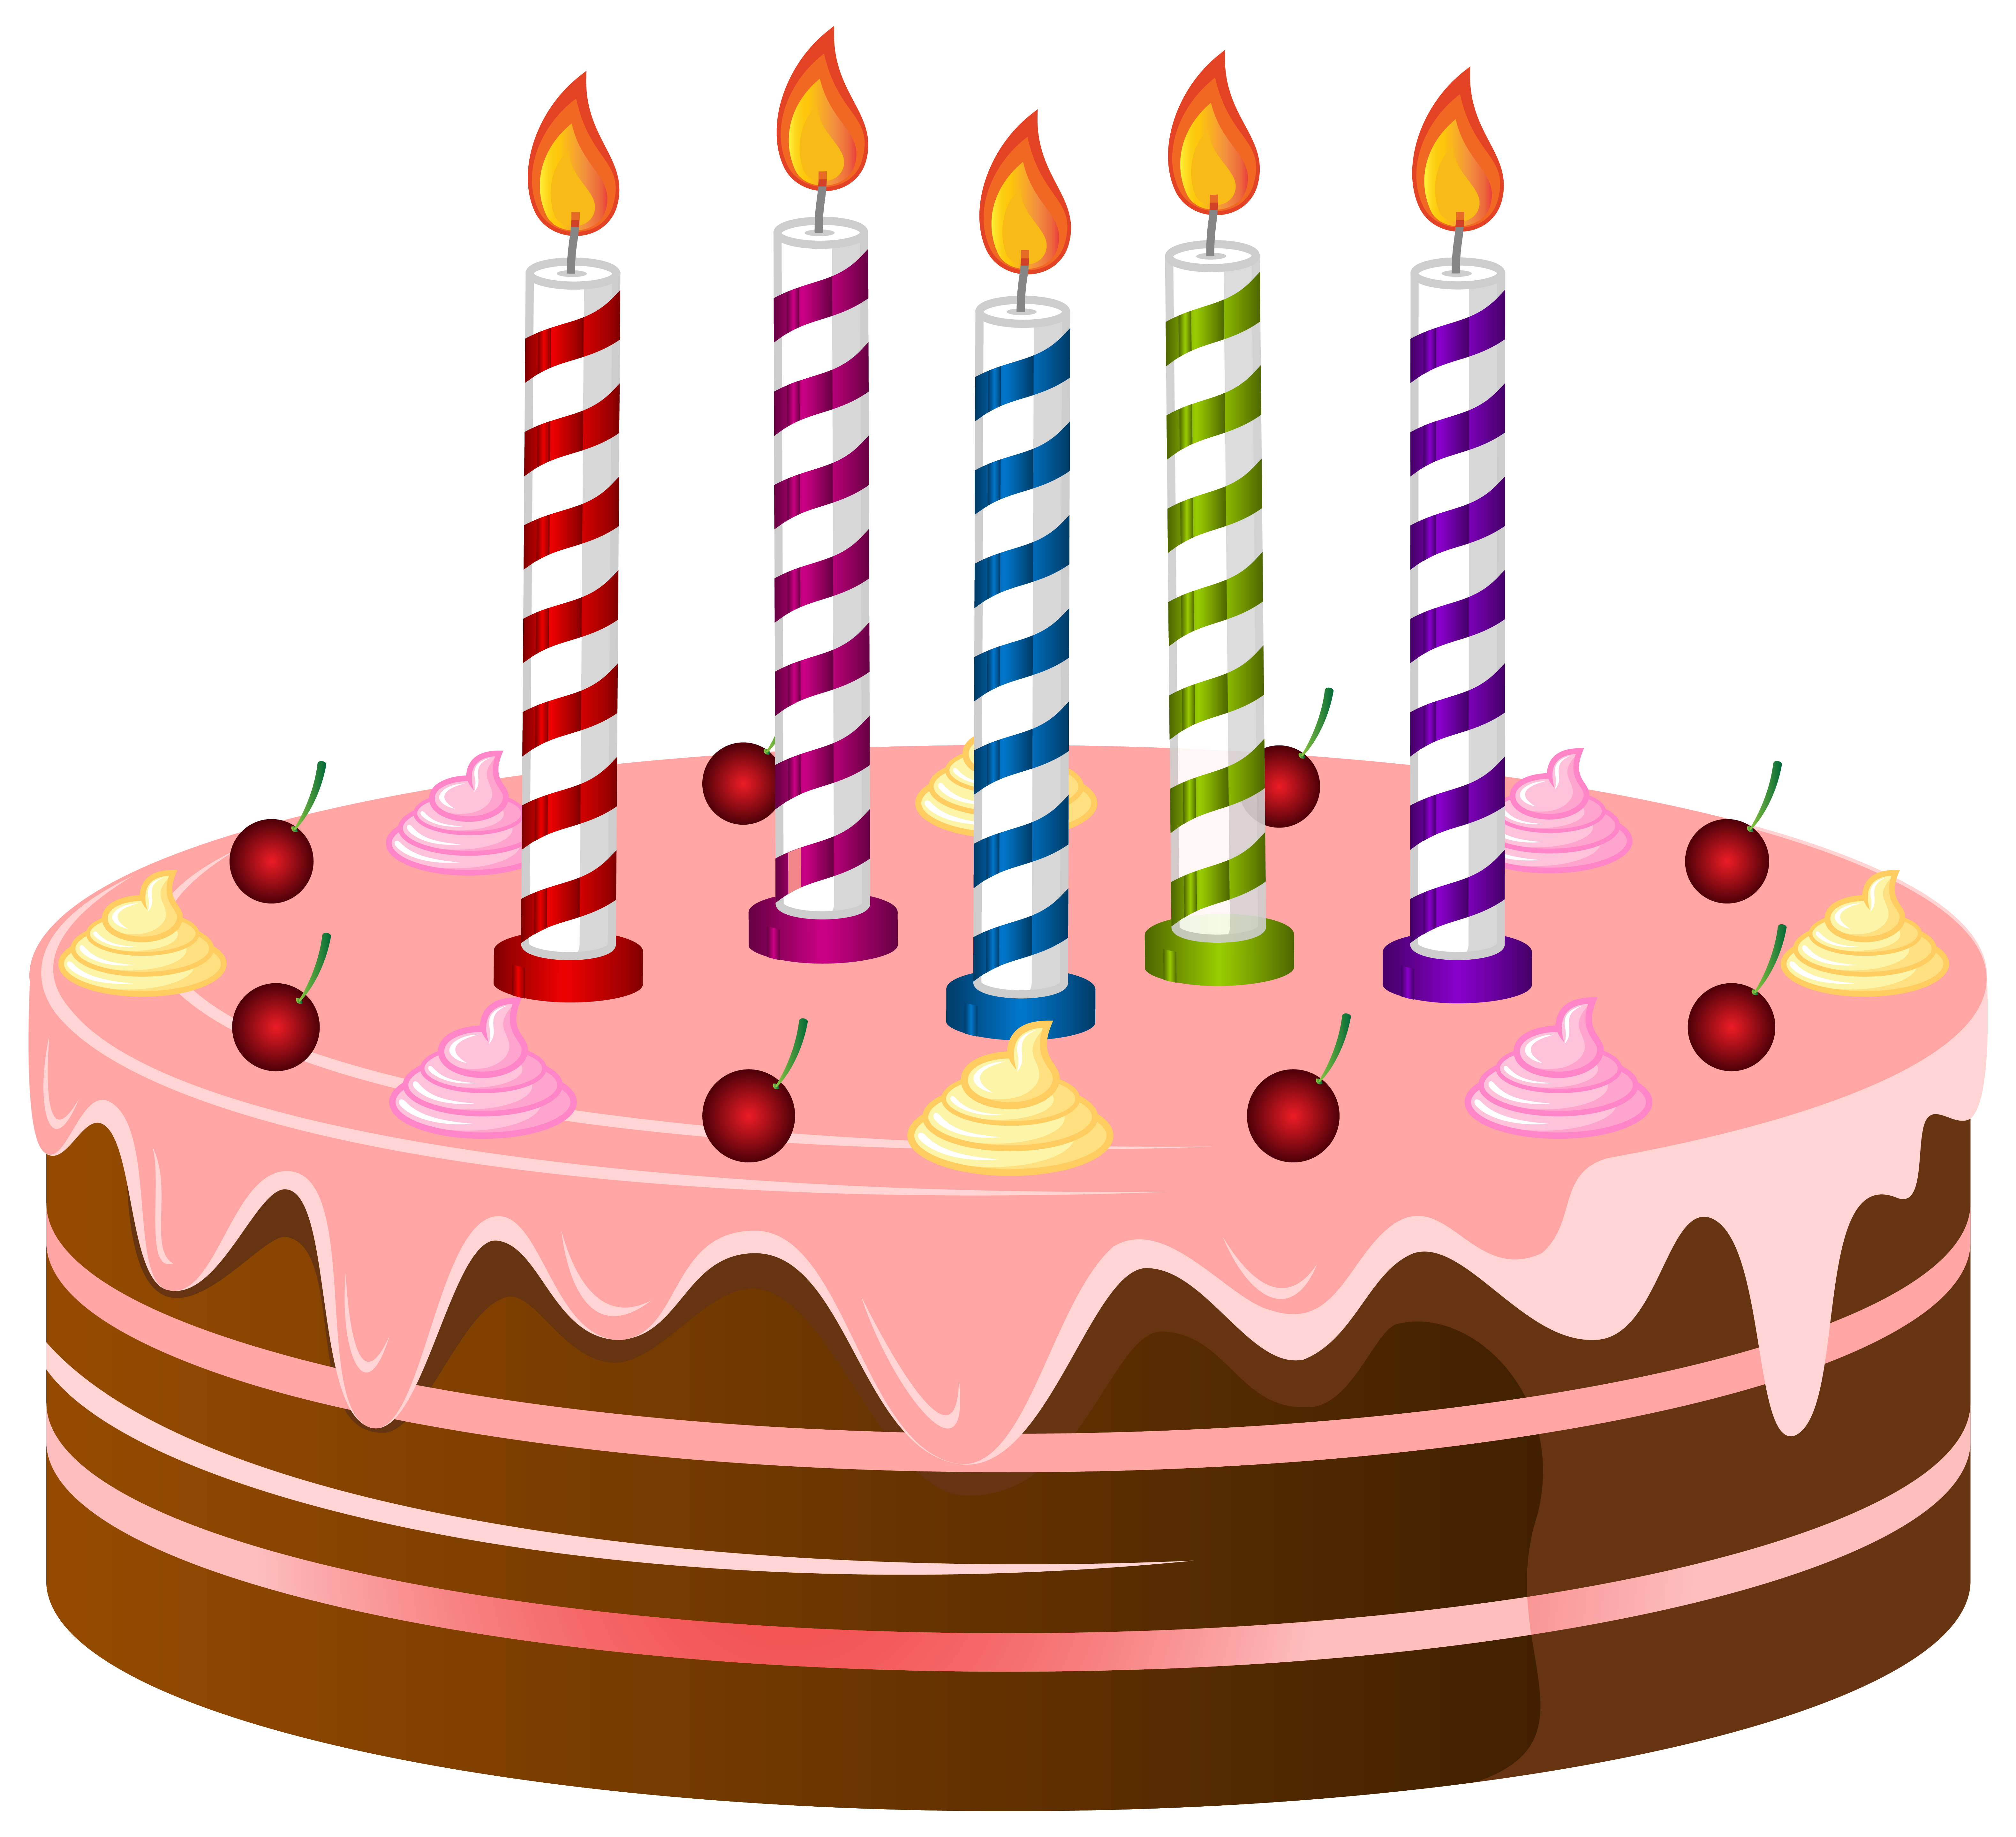 Cake clipart #17, Download drawings